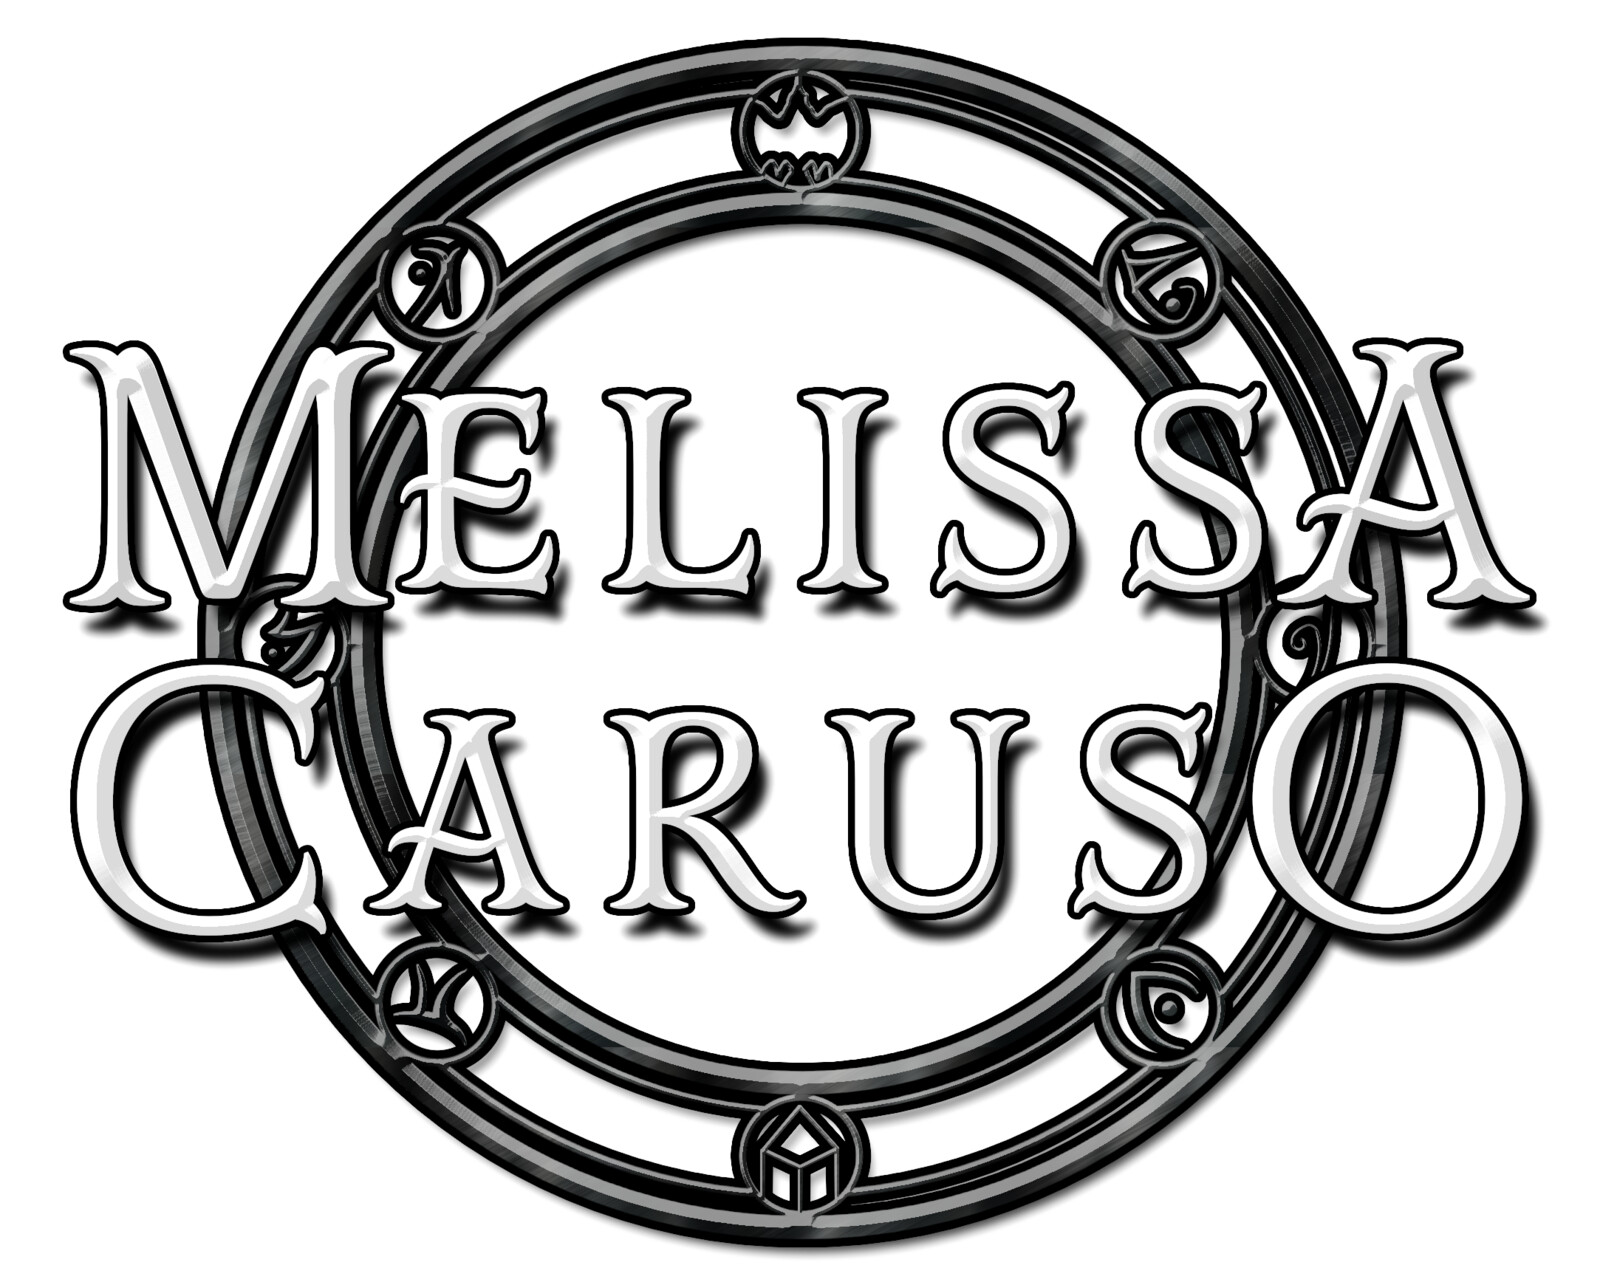 Logos for Melissa Caruso, author of the Swords and Fire series - Krita